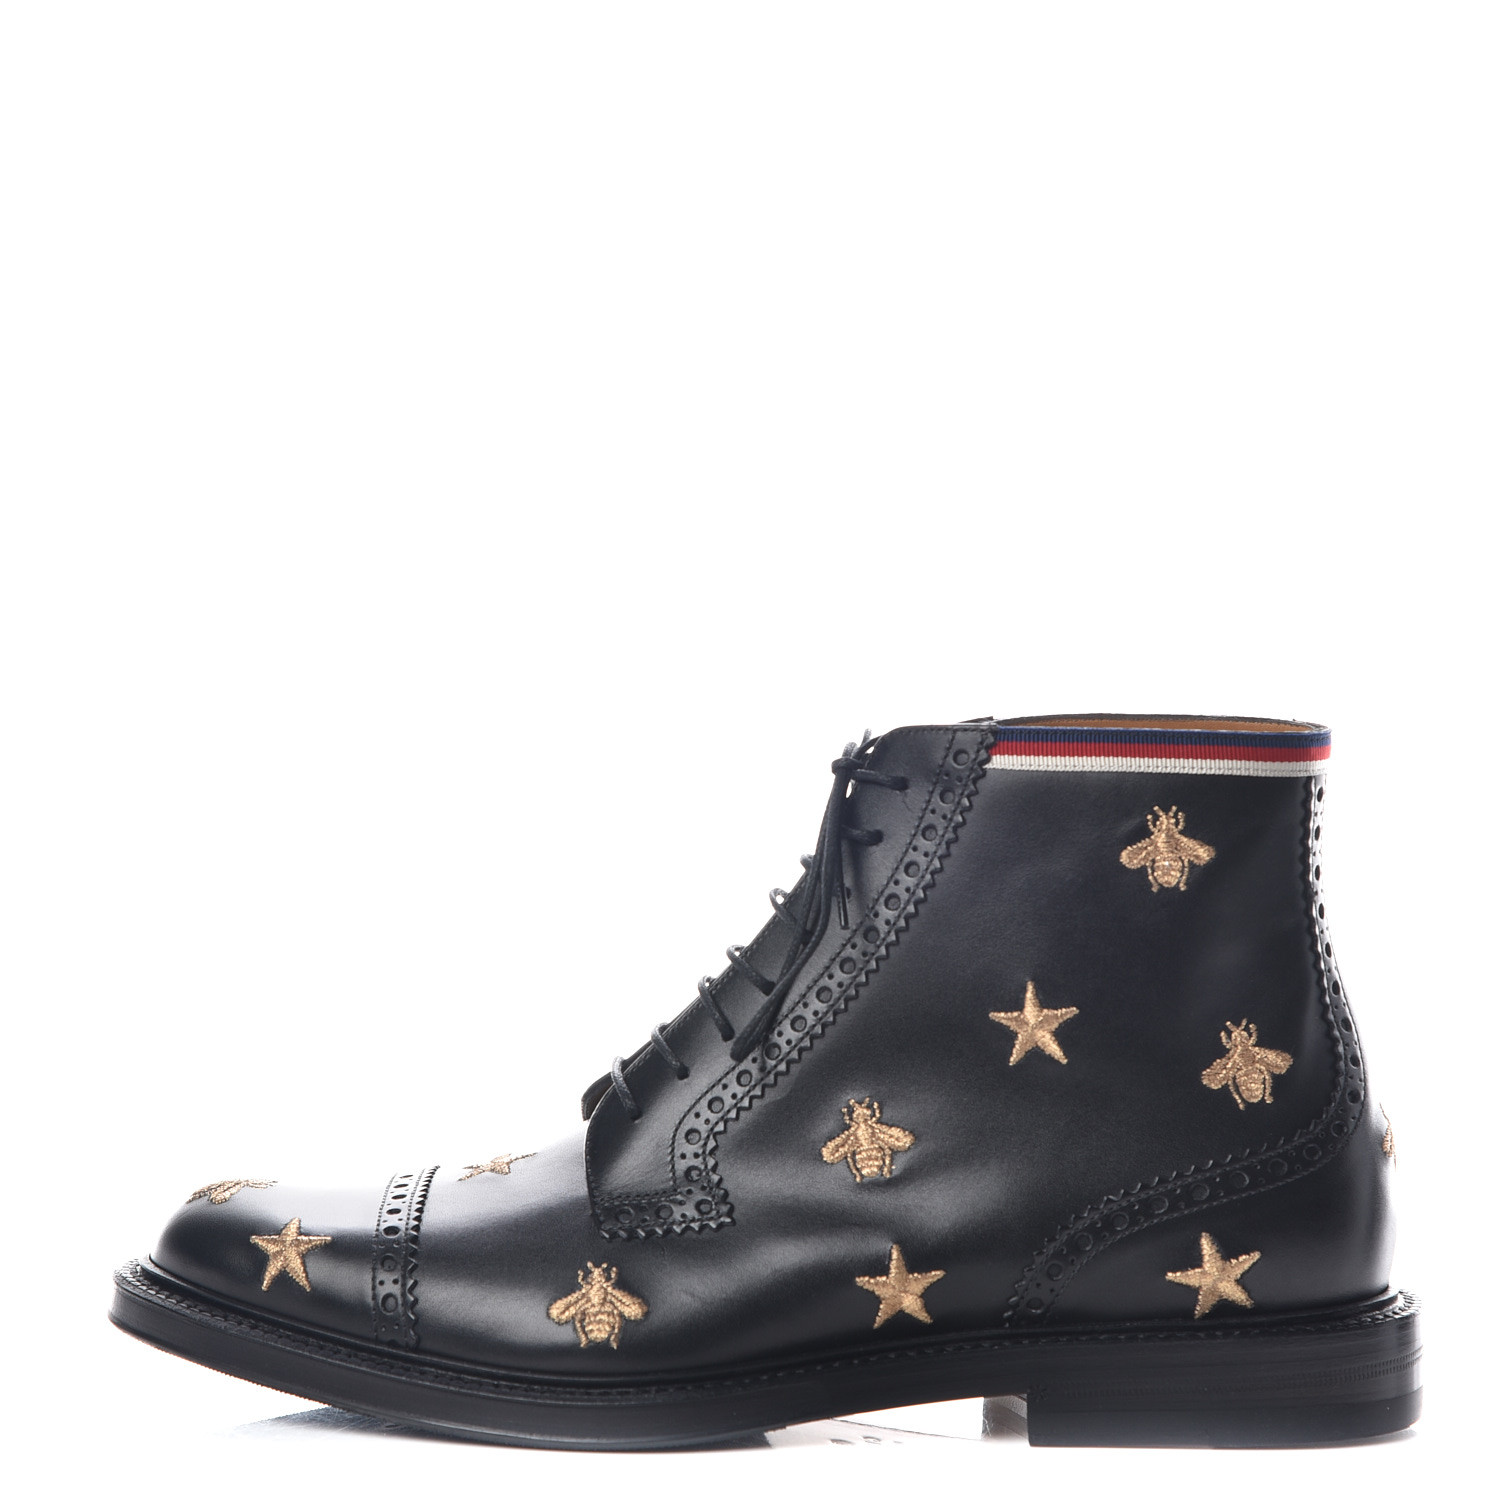 GUCCI Calfskin Embroidered Bee Star Mens Brogue Boots 8 Black 407336